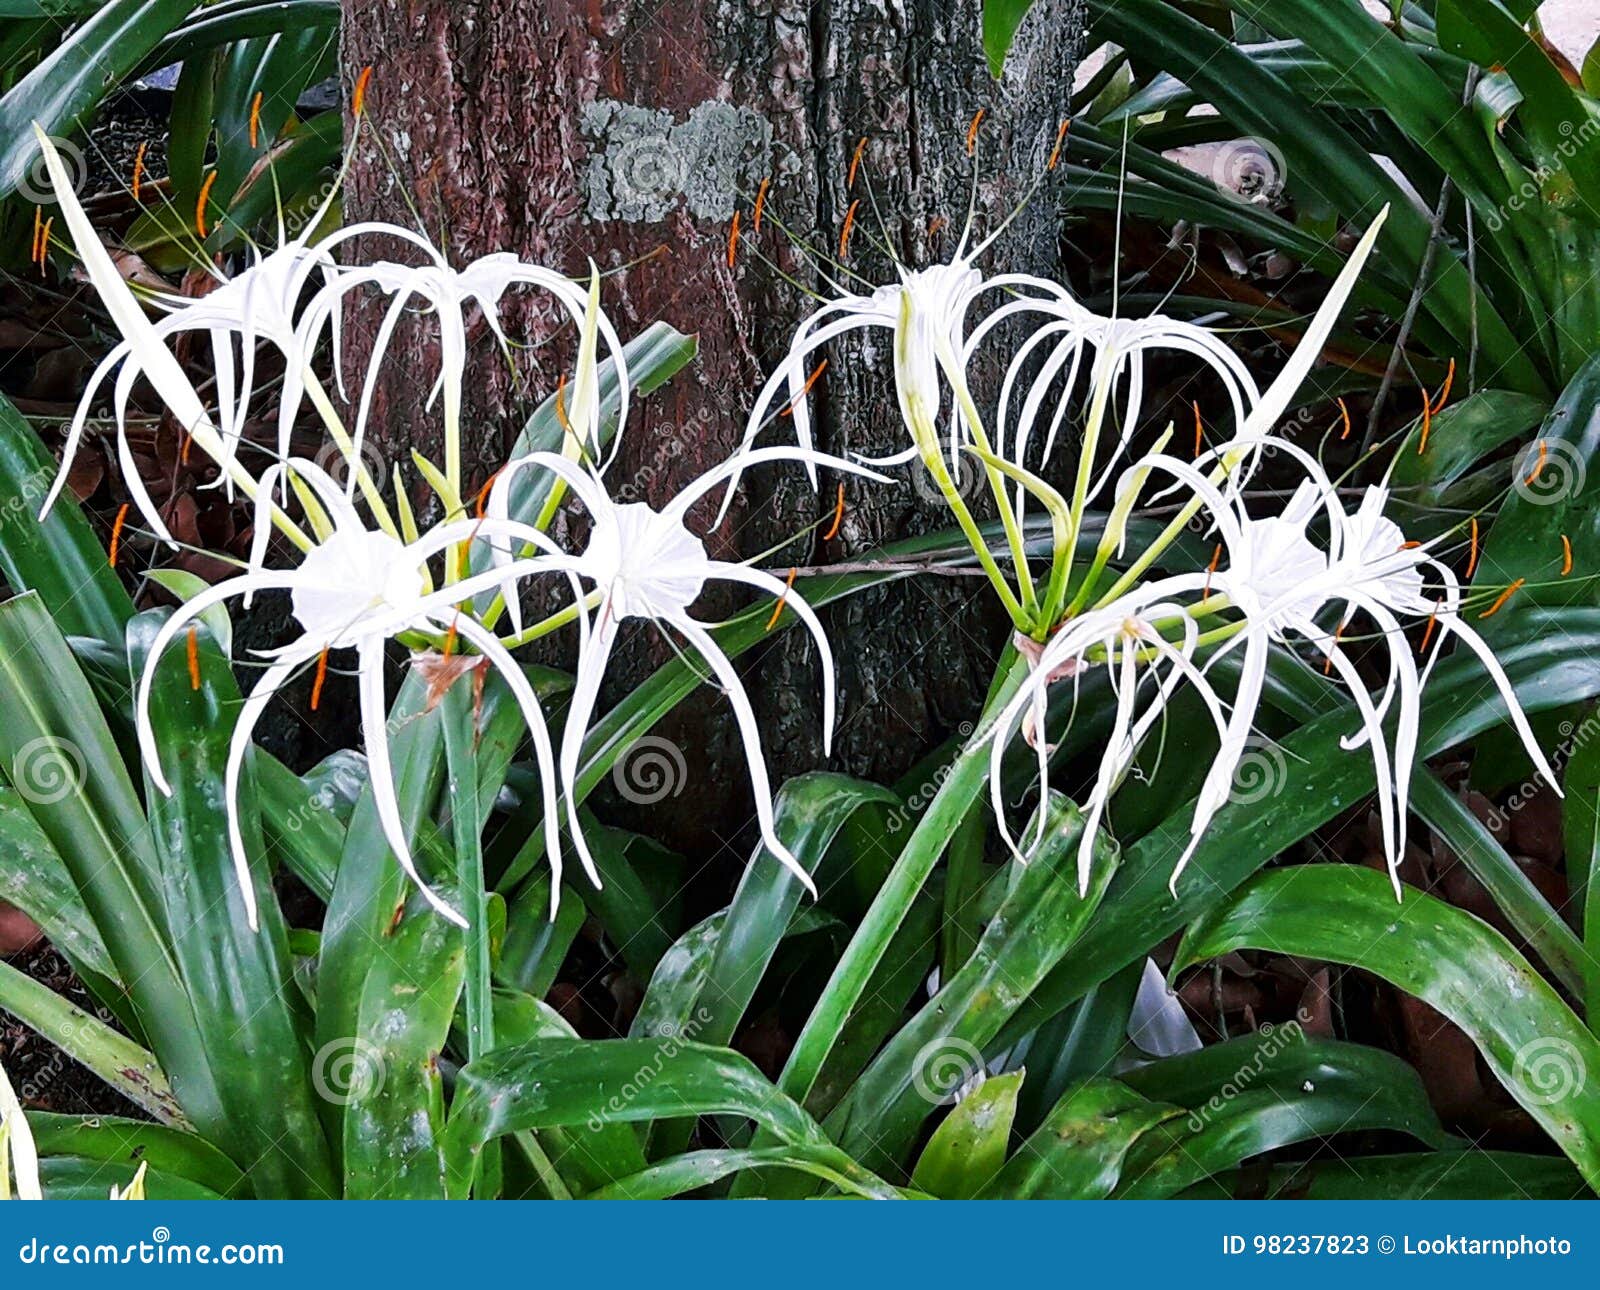 Crinum Lily Asiaticum C Giant White Spider Lily 5 bulbs